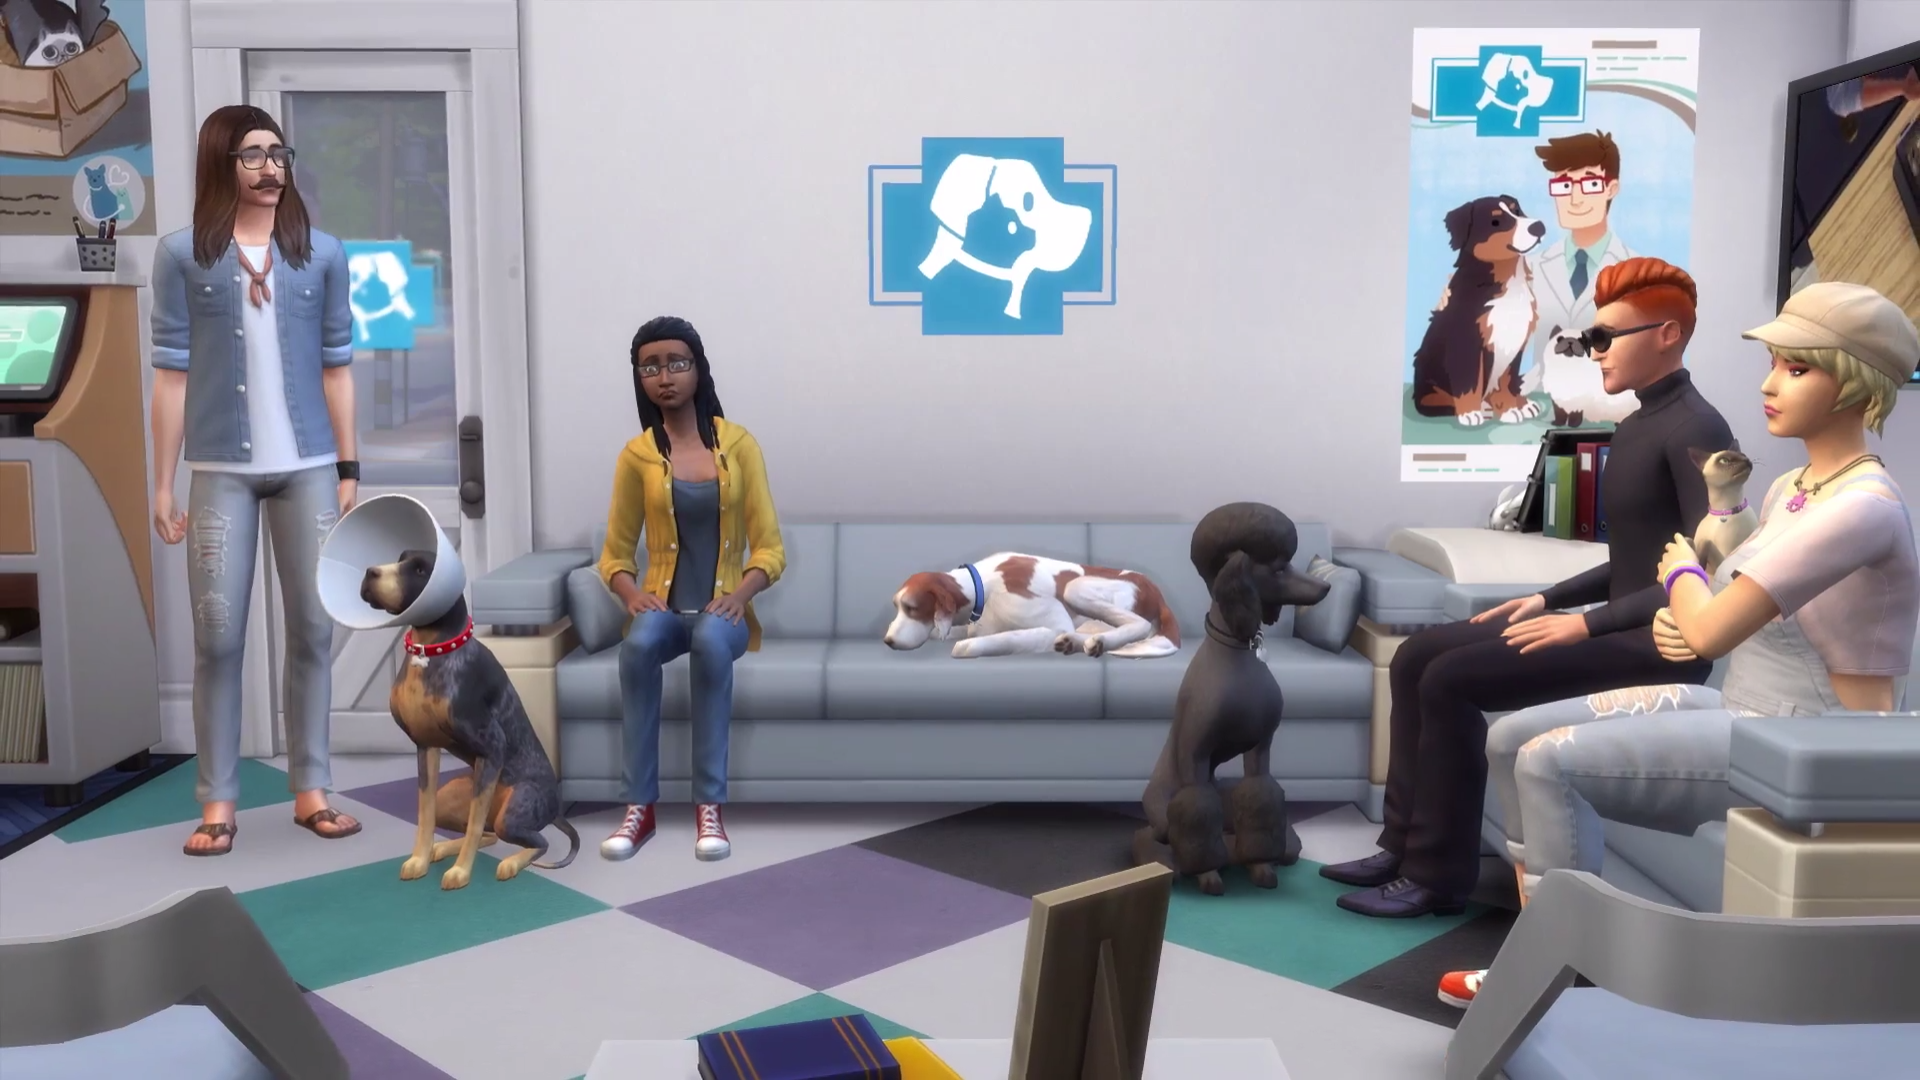 2017-08-21-19_16_28-the-sims-4-cats-dogs_-official-reveal-trailer-youtube.png